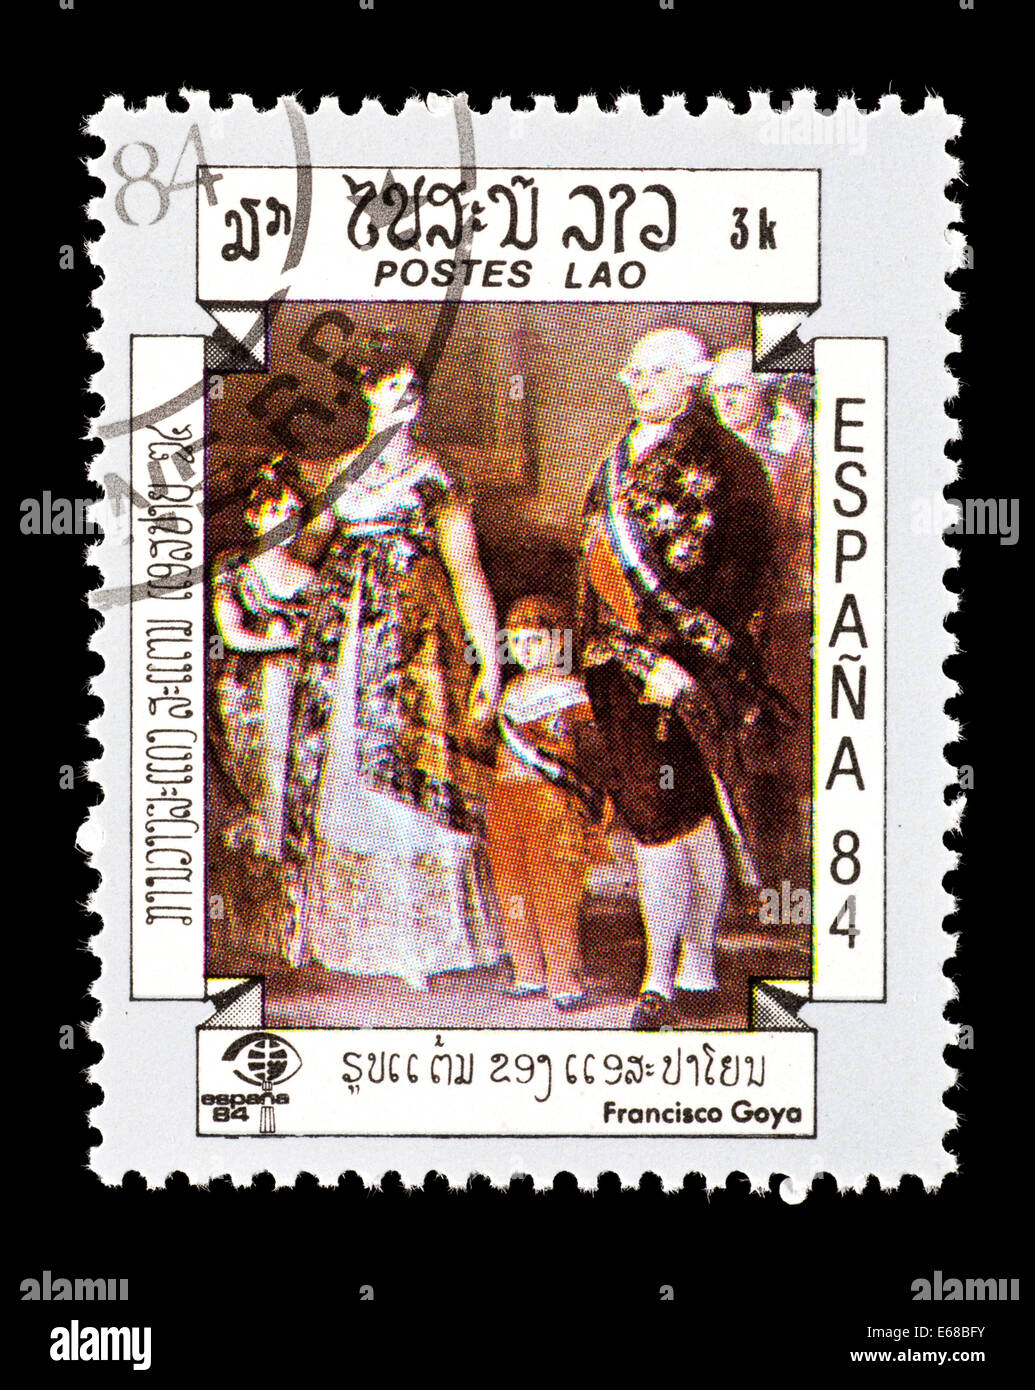 Postage stamp from Laos depicting the Goya painting "Family of Charles IV" Stock Photo